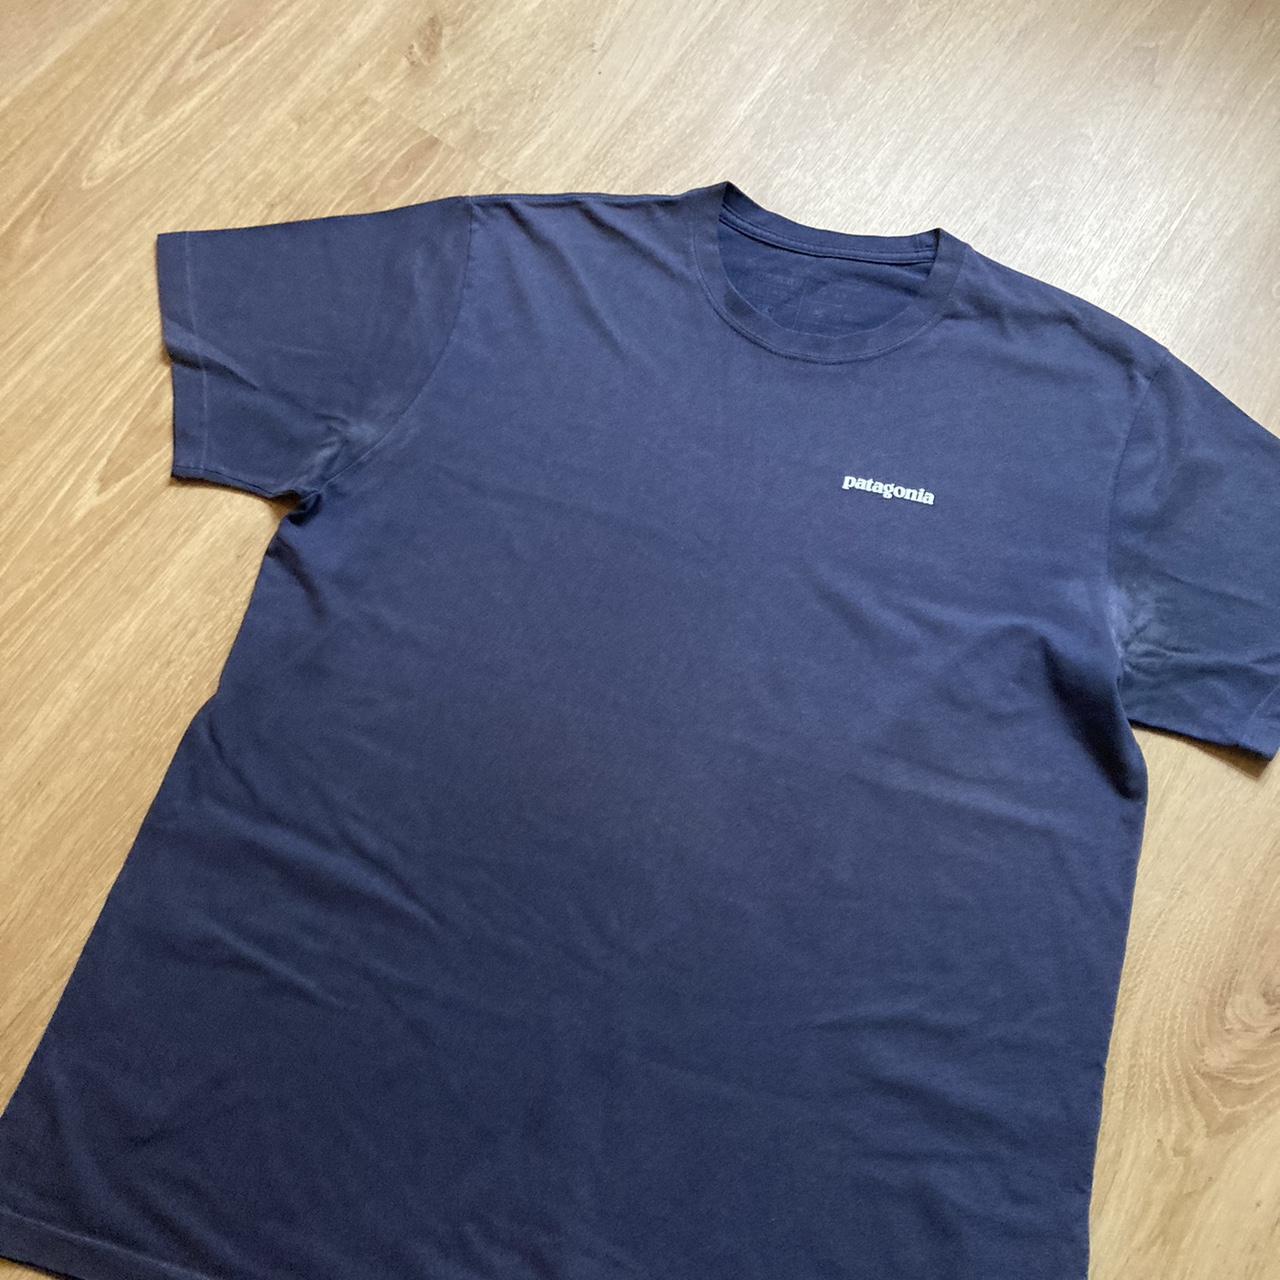 Patagonia tshirt in navy with front and back logo... - Depop